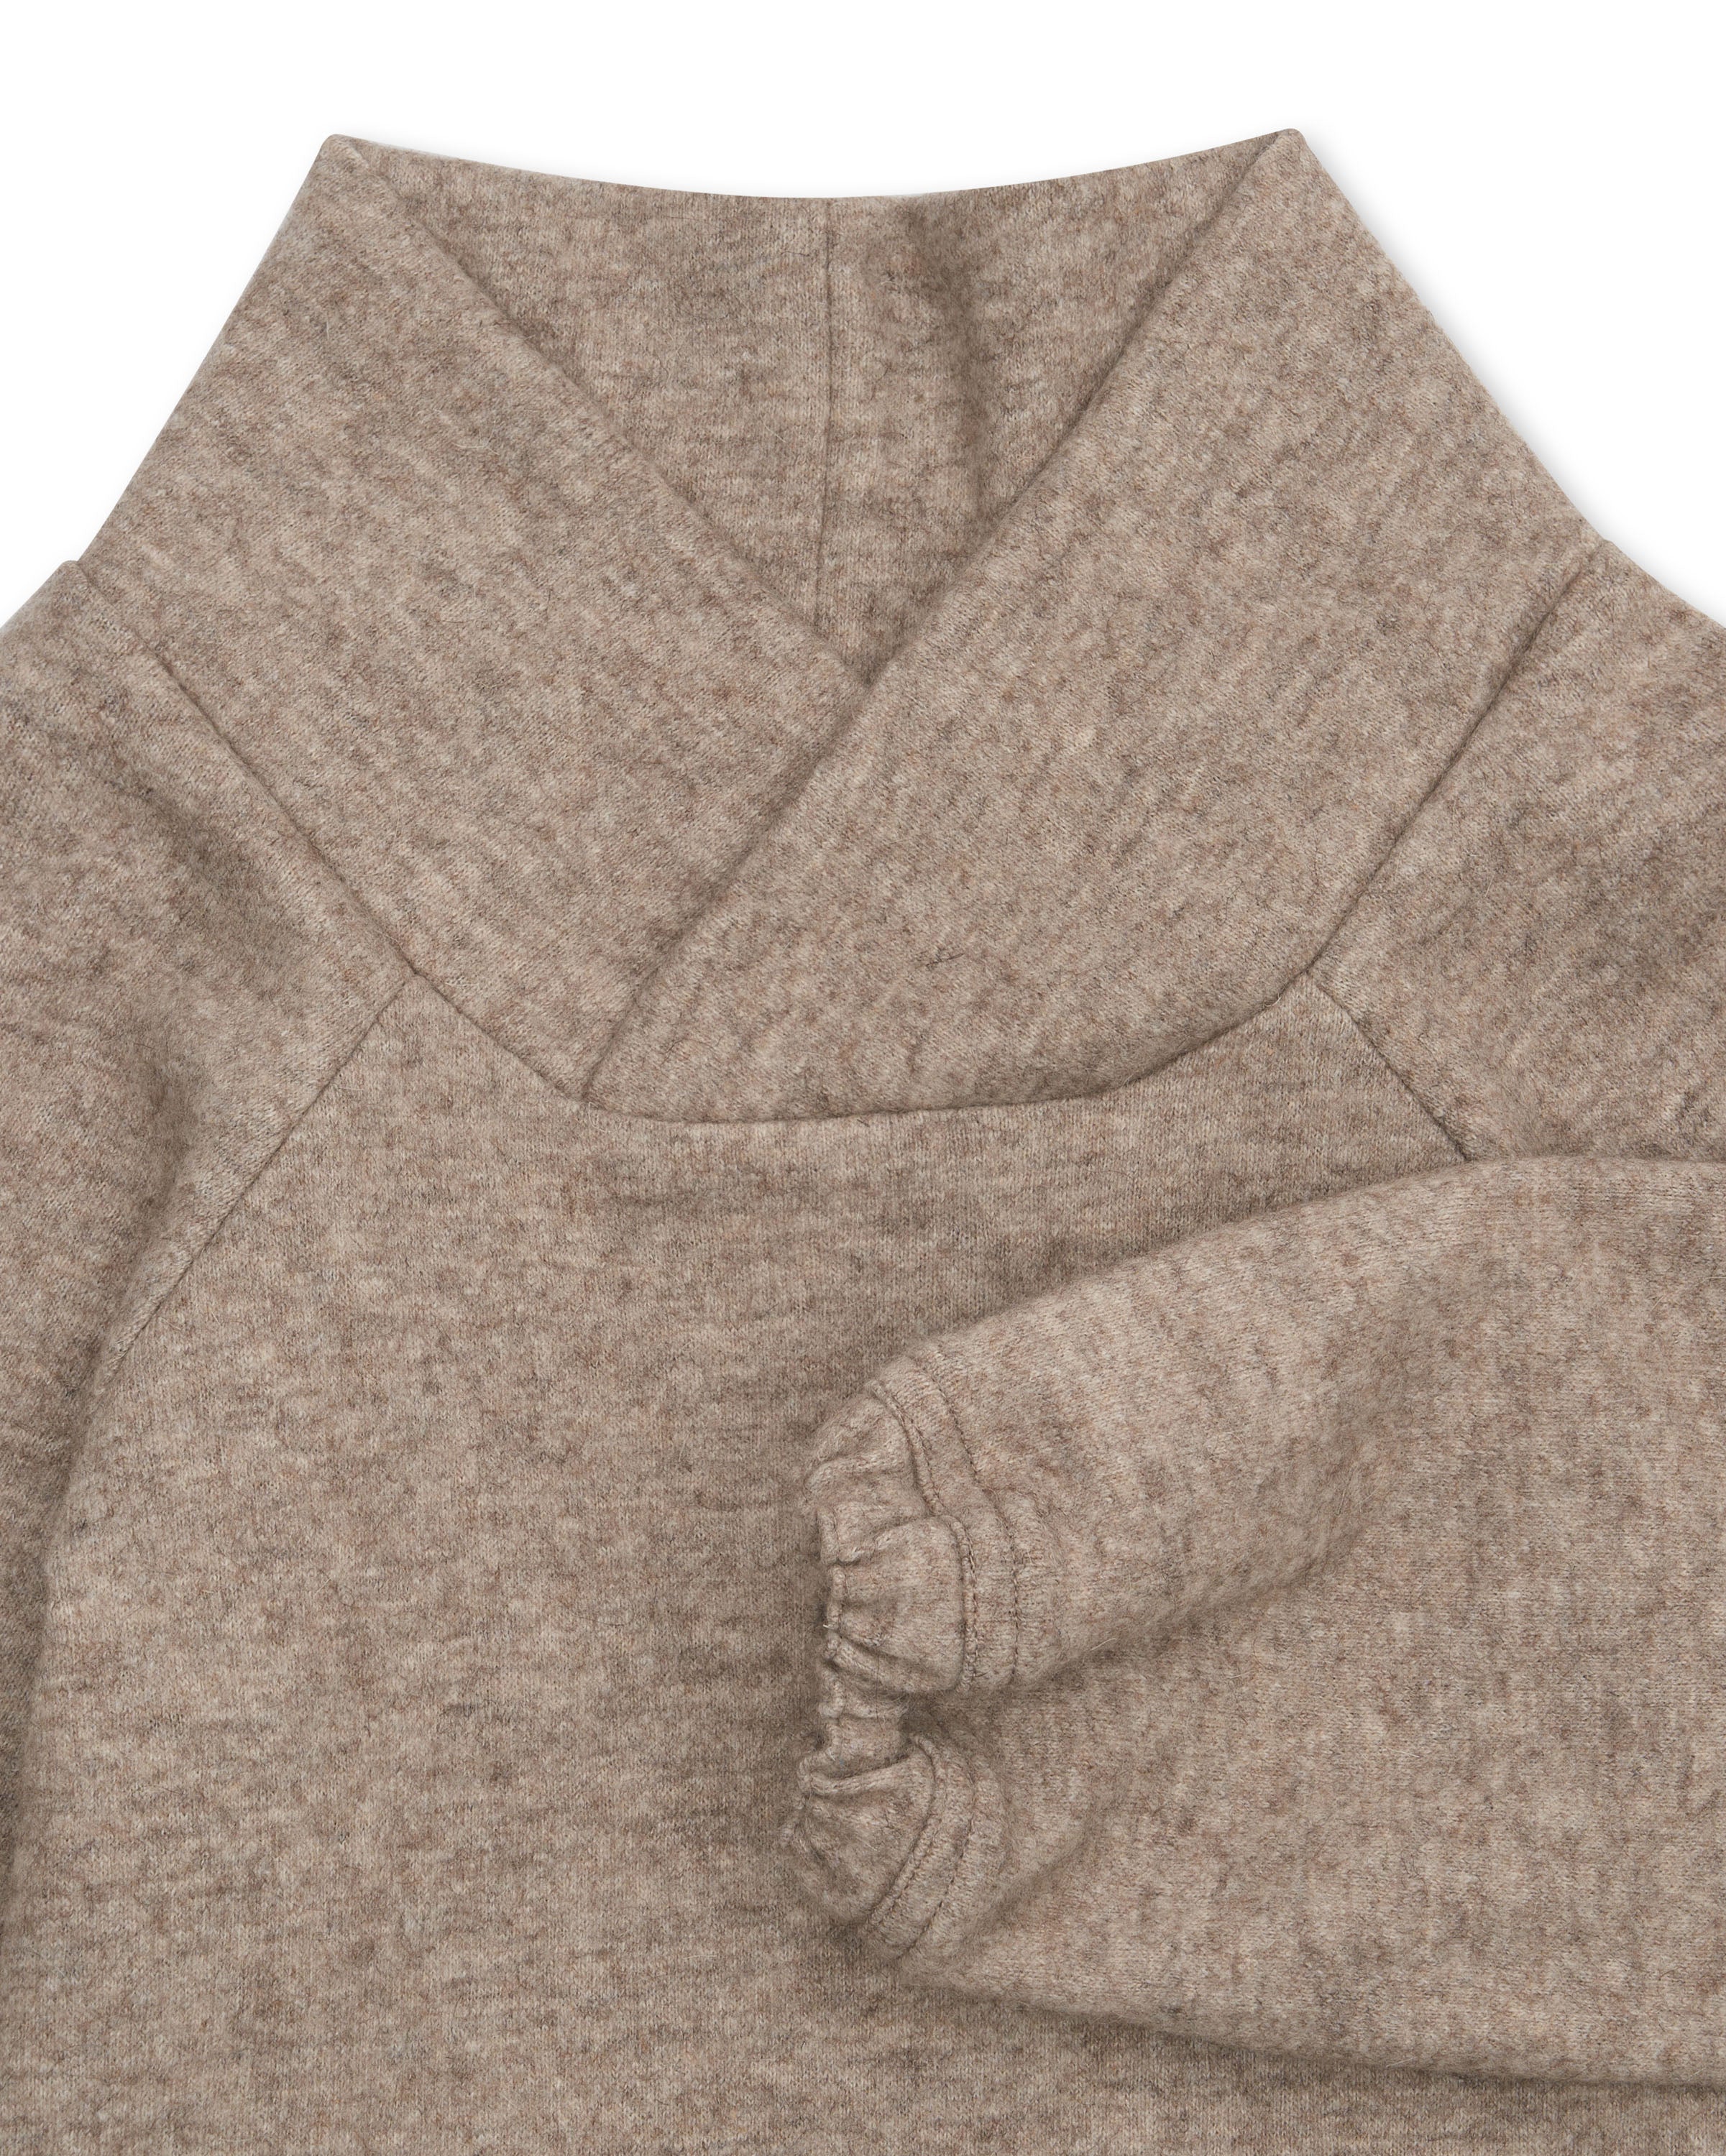 Boys' Designer Jumper, Wool/Polyester Blend, Oatmeal, ages 1 to 6.